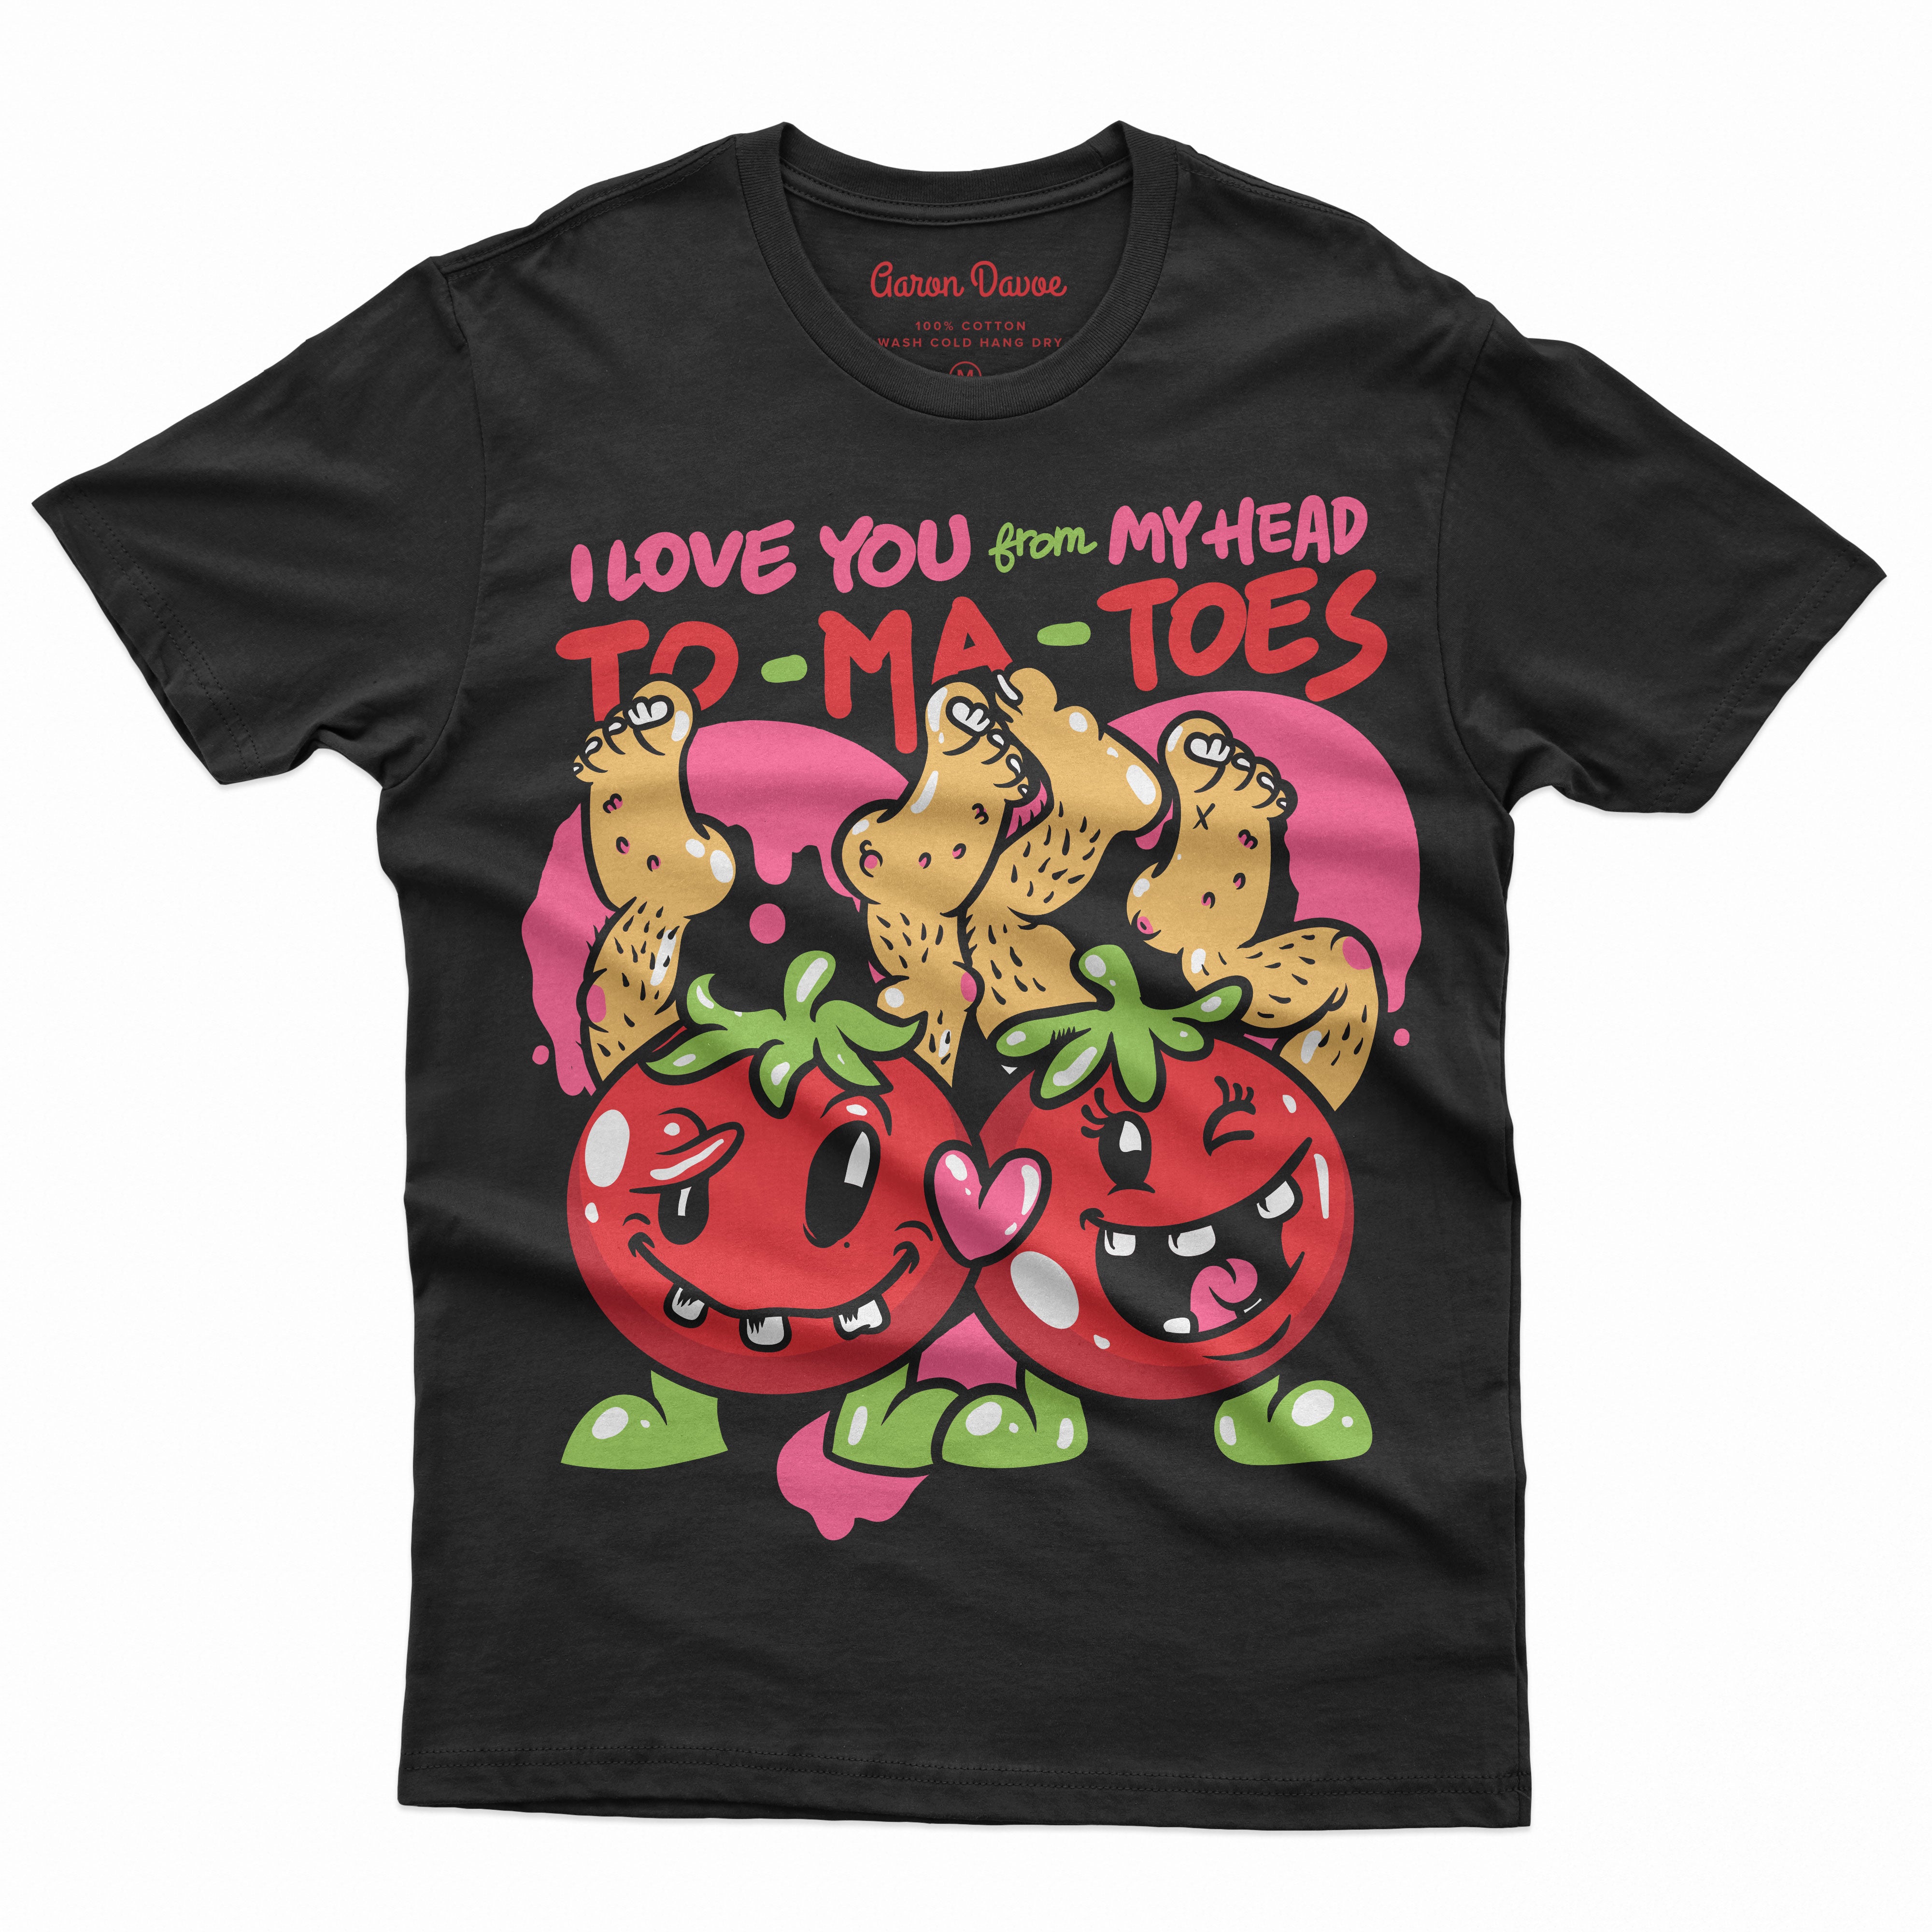 I Love You From My Head To-Ma-Toes freeshipping - Aarondavoe